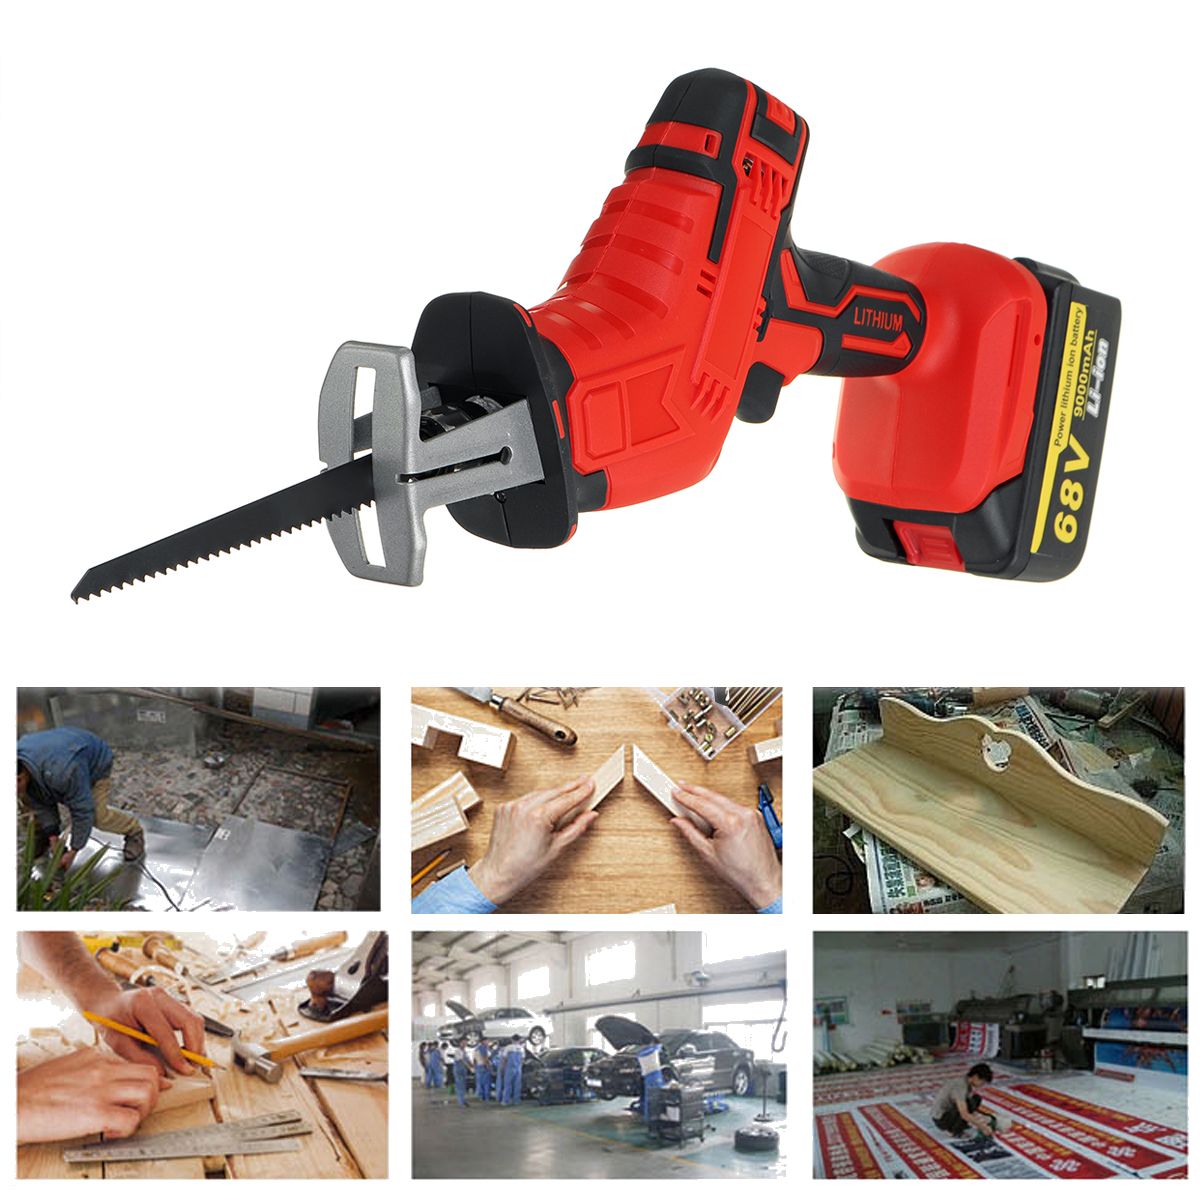 68V-9000mah-Electric-Reciprocating-Saw-Outdoor-Woodworking-Cordless-Portable-Saw-1683595